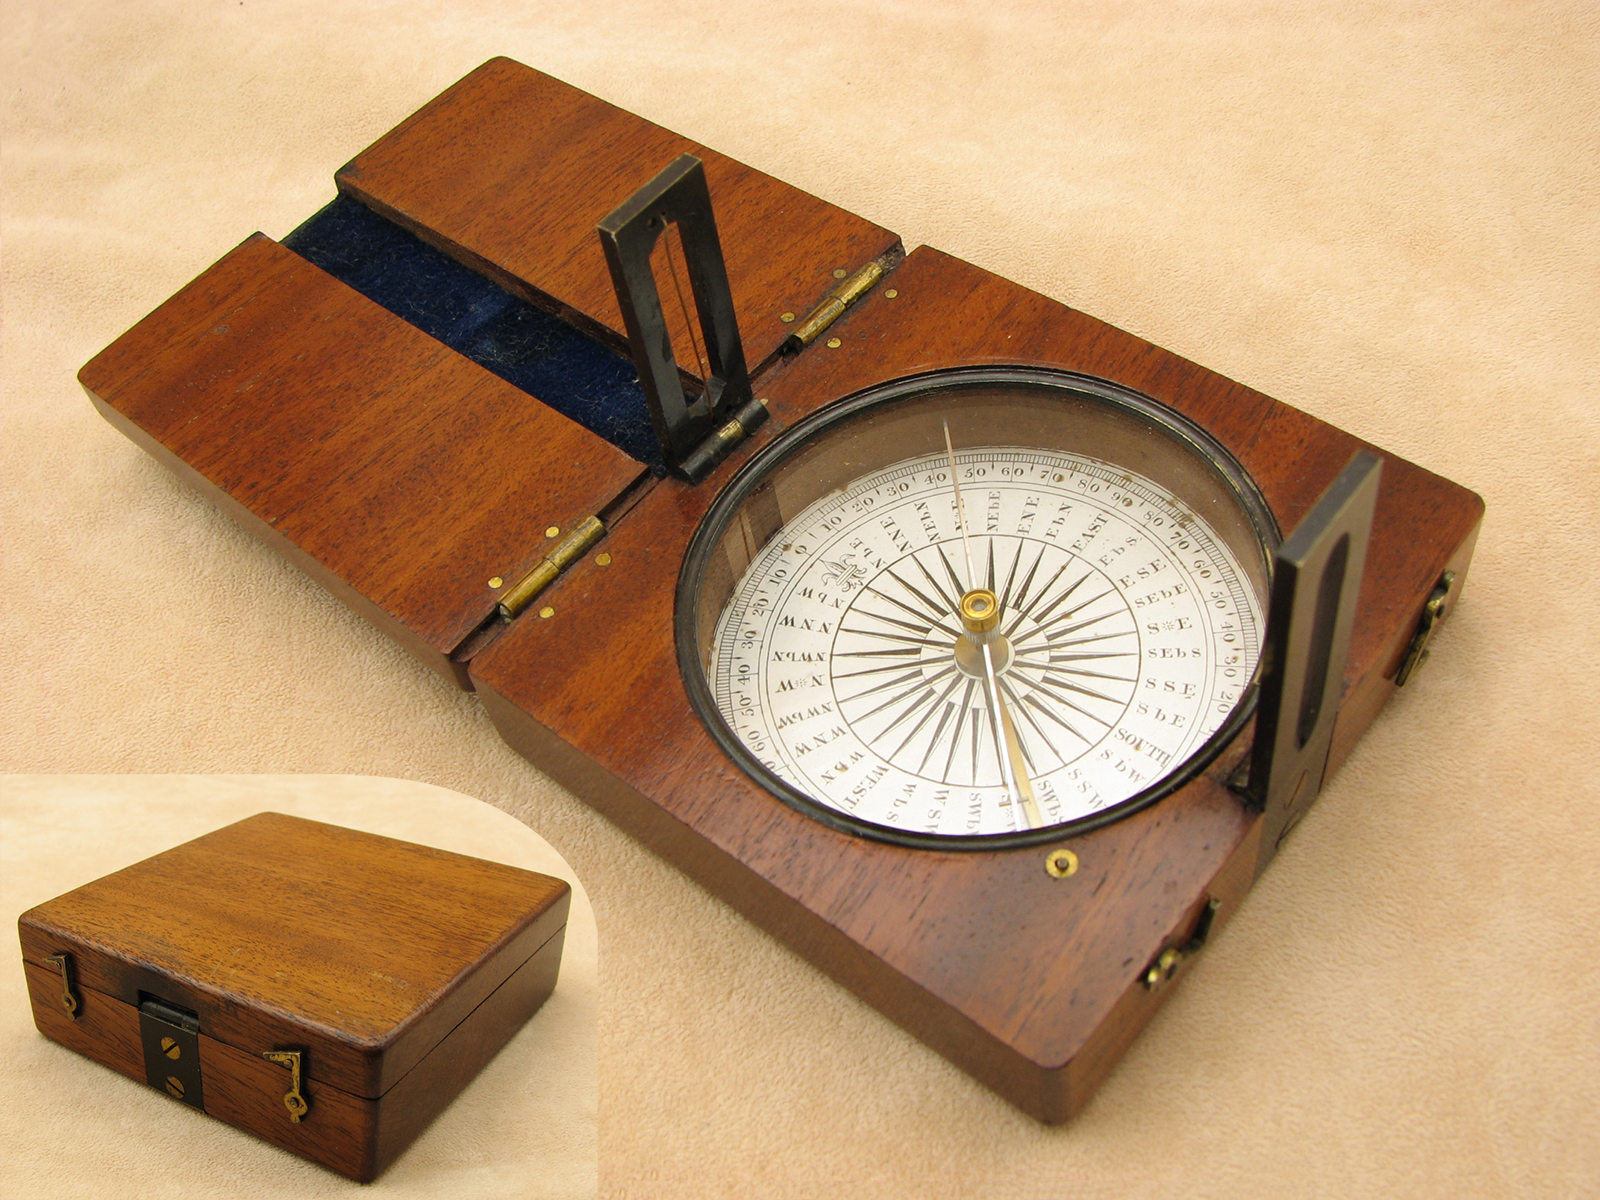 Antique Francis Barker mahogany cased needle compass with twin sight vanes